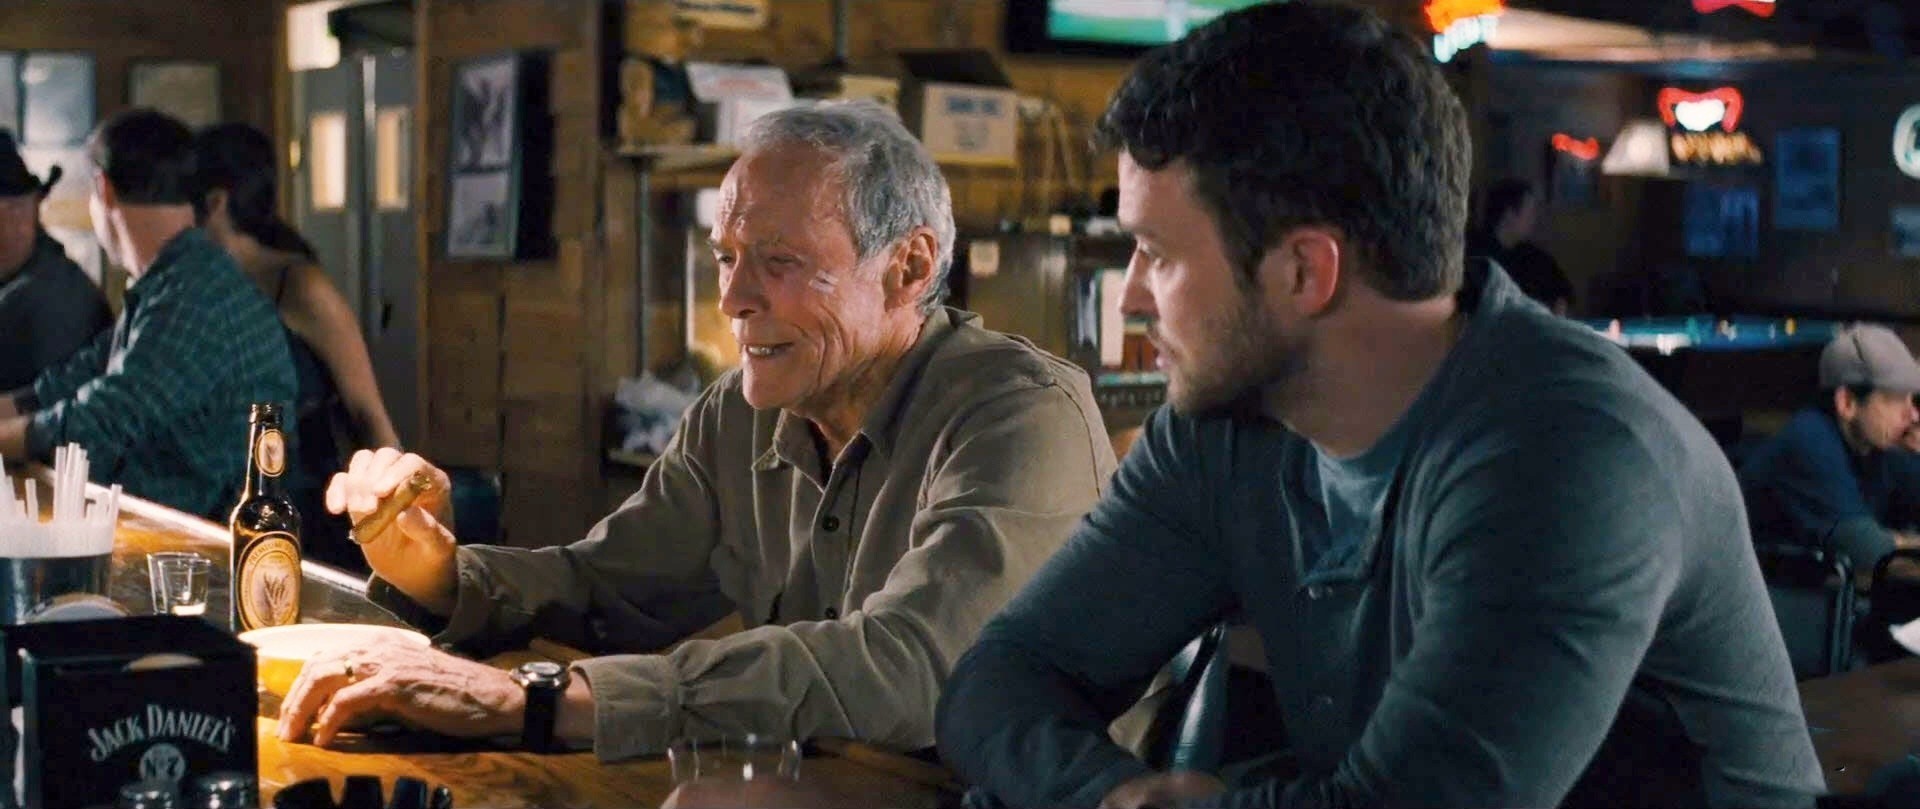 Clint Eastwood stars as Gus and Justin Timberlake stars as Johnny Flanagan in Warner Bros. Pictures' Trouble with the Curve (2012)